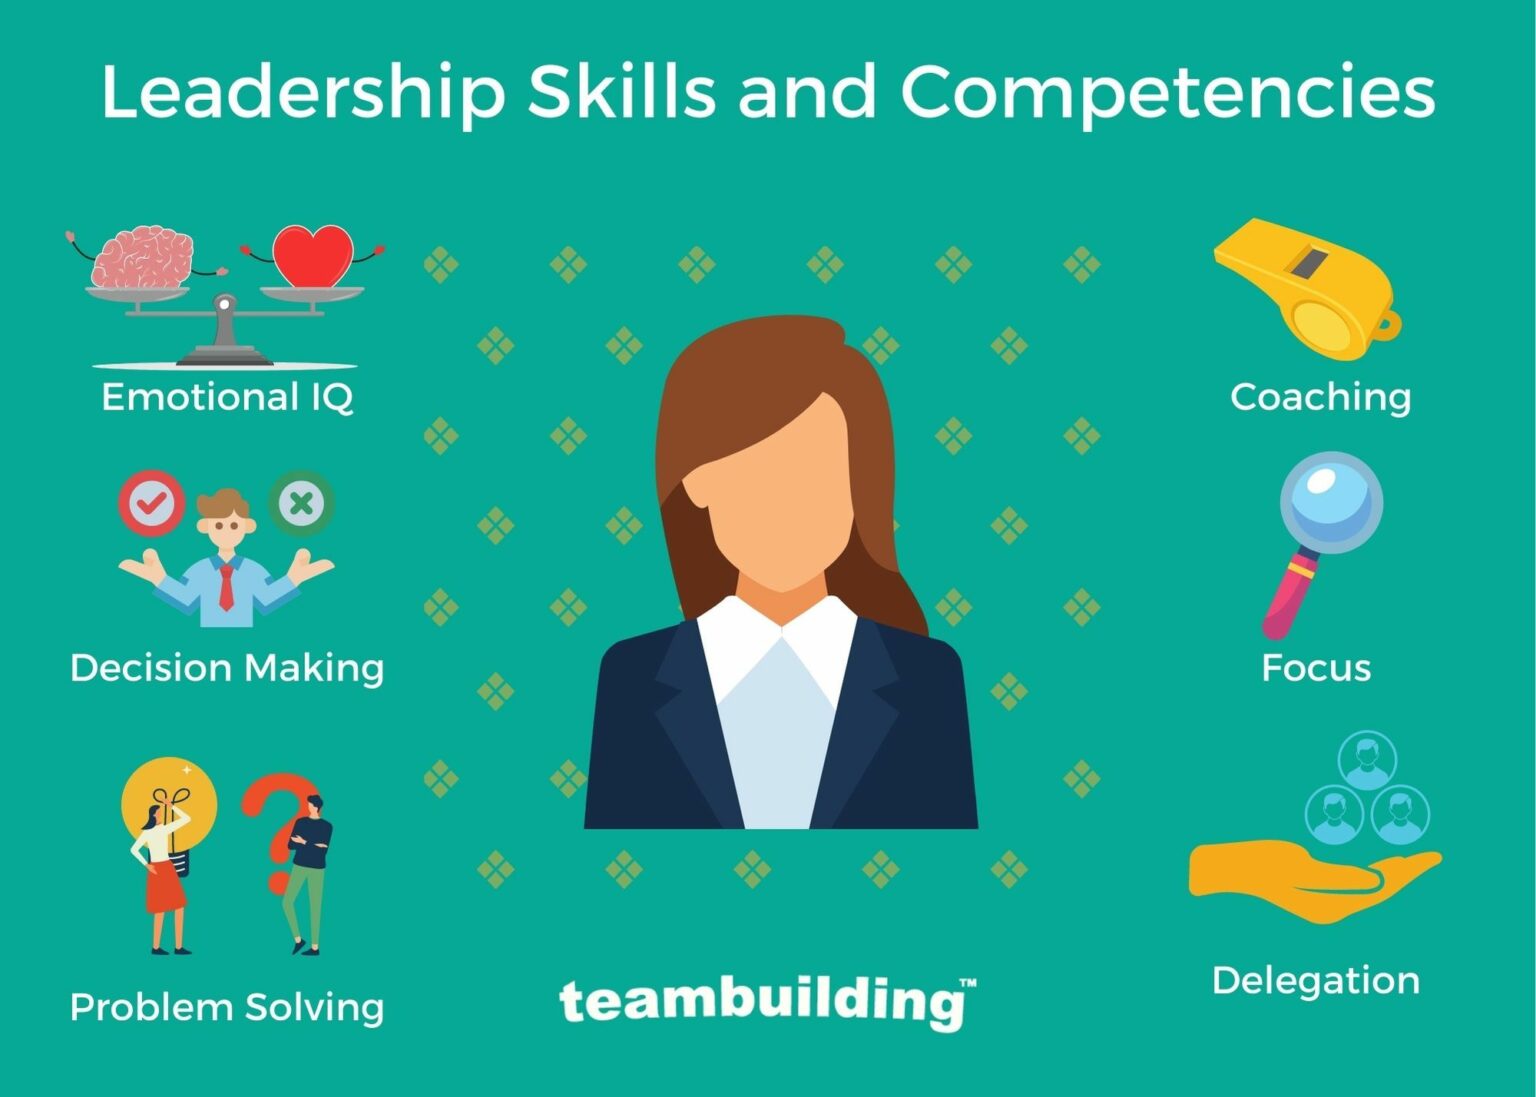 Top skills required for leadership and management